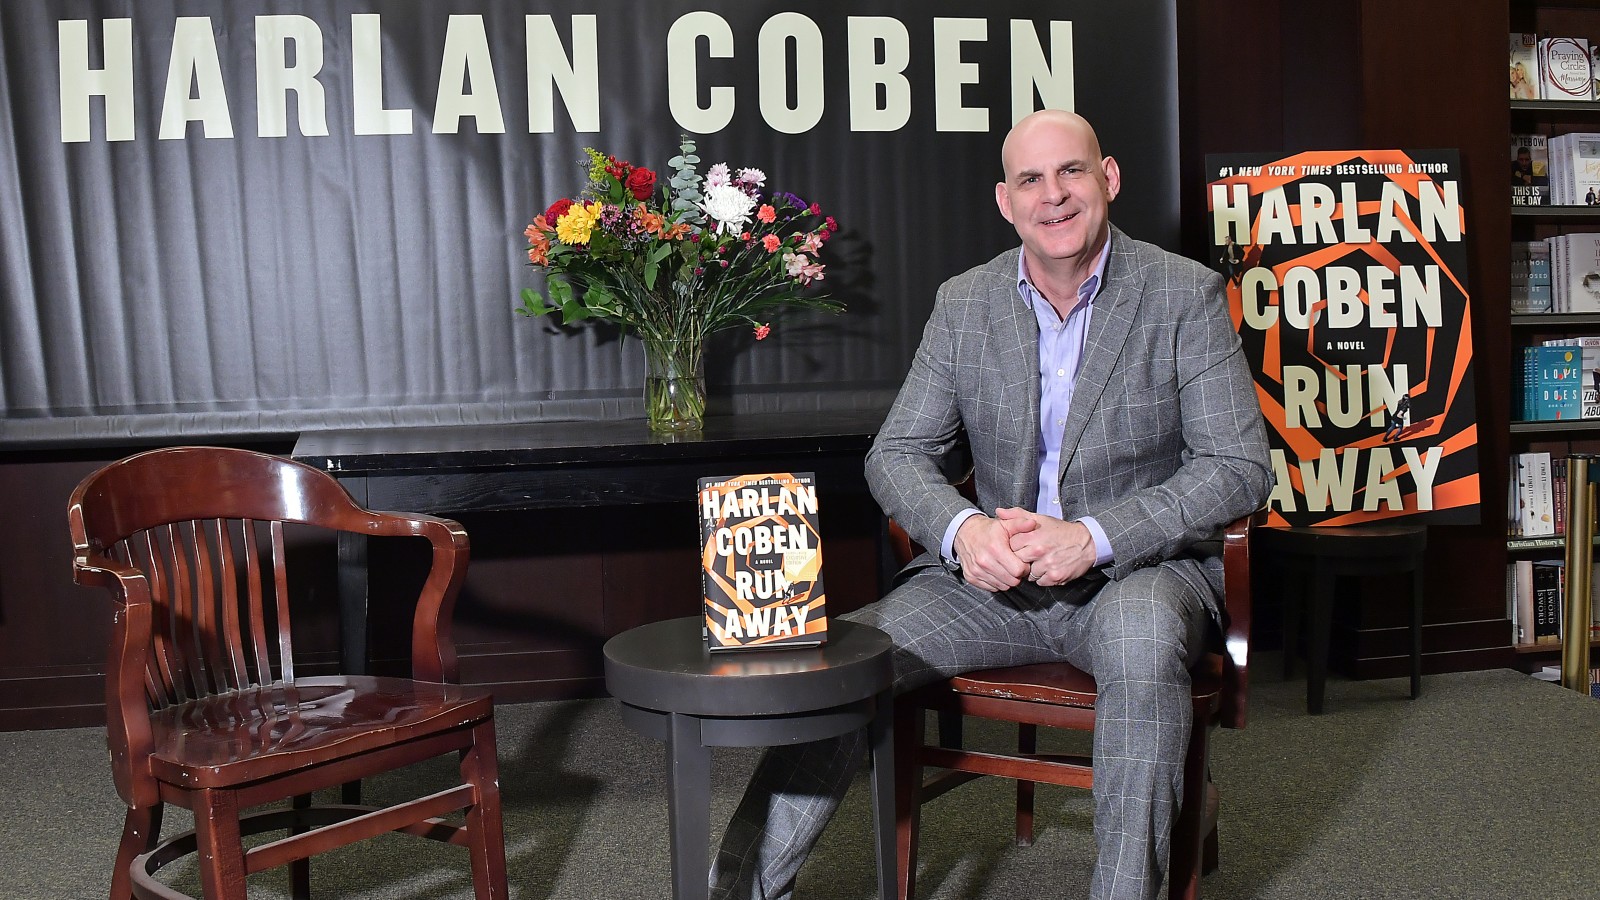 Hold Tight': Harlan Coben's New Netflix Show Has a Connection to